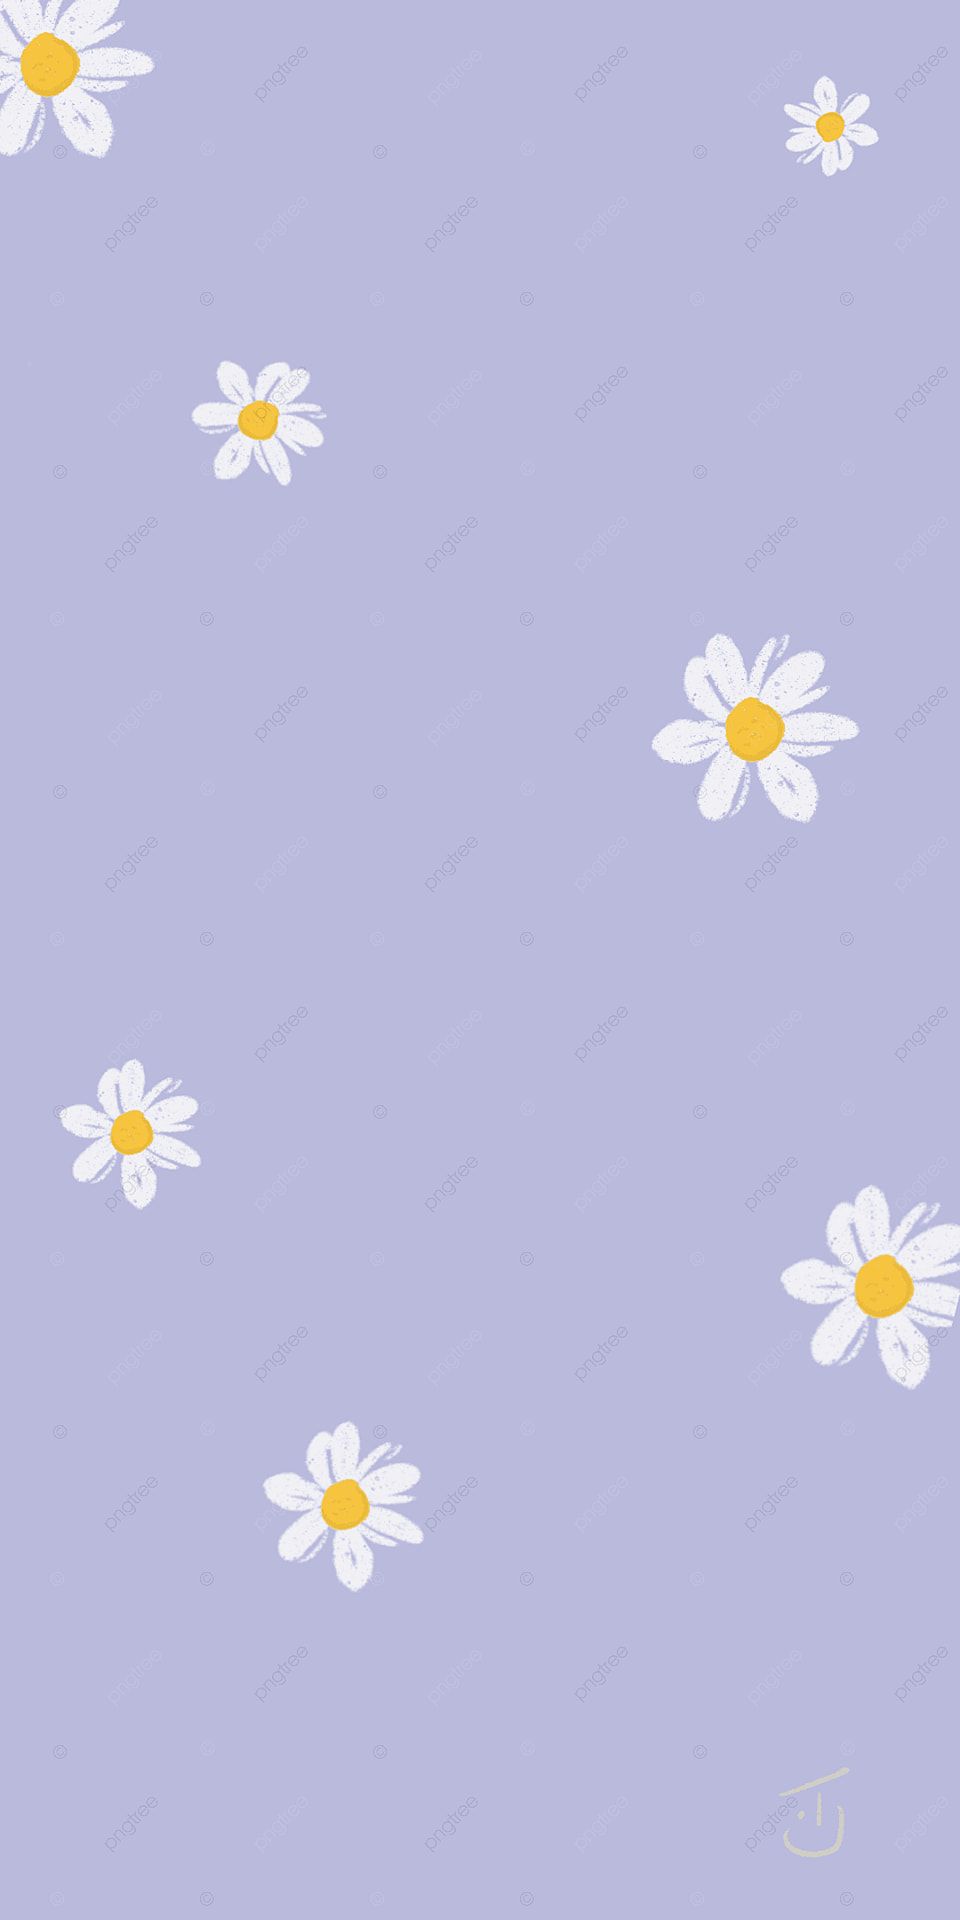 Small Daisy Purple Mobile Phone Wallpaper Background Cute Flower